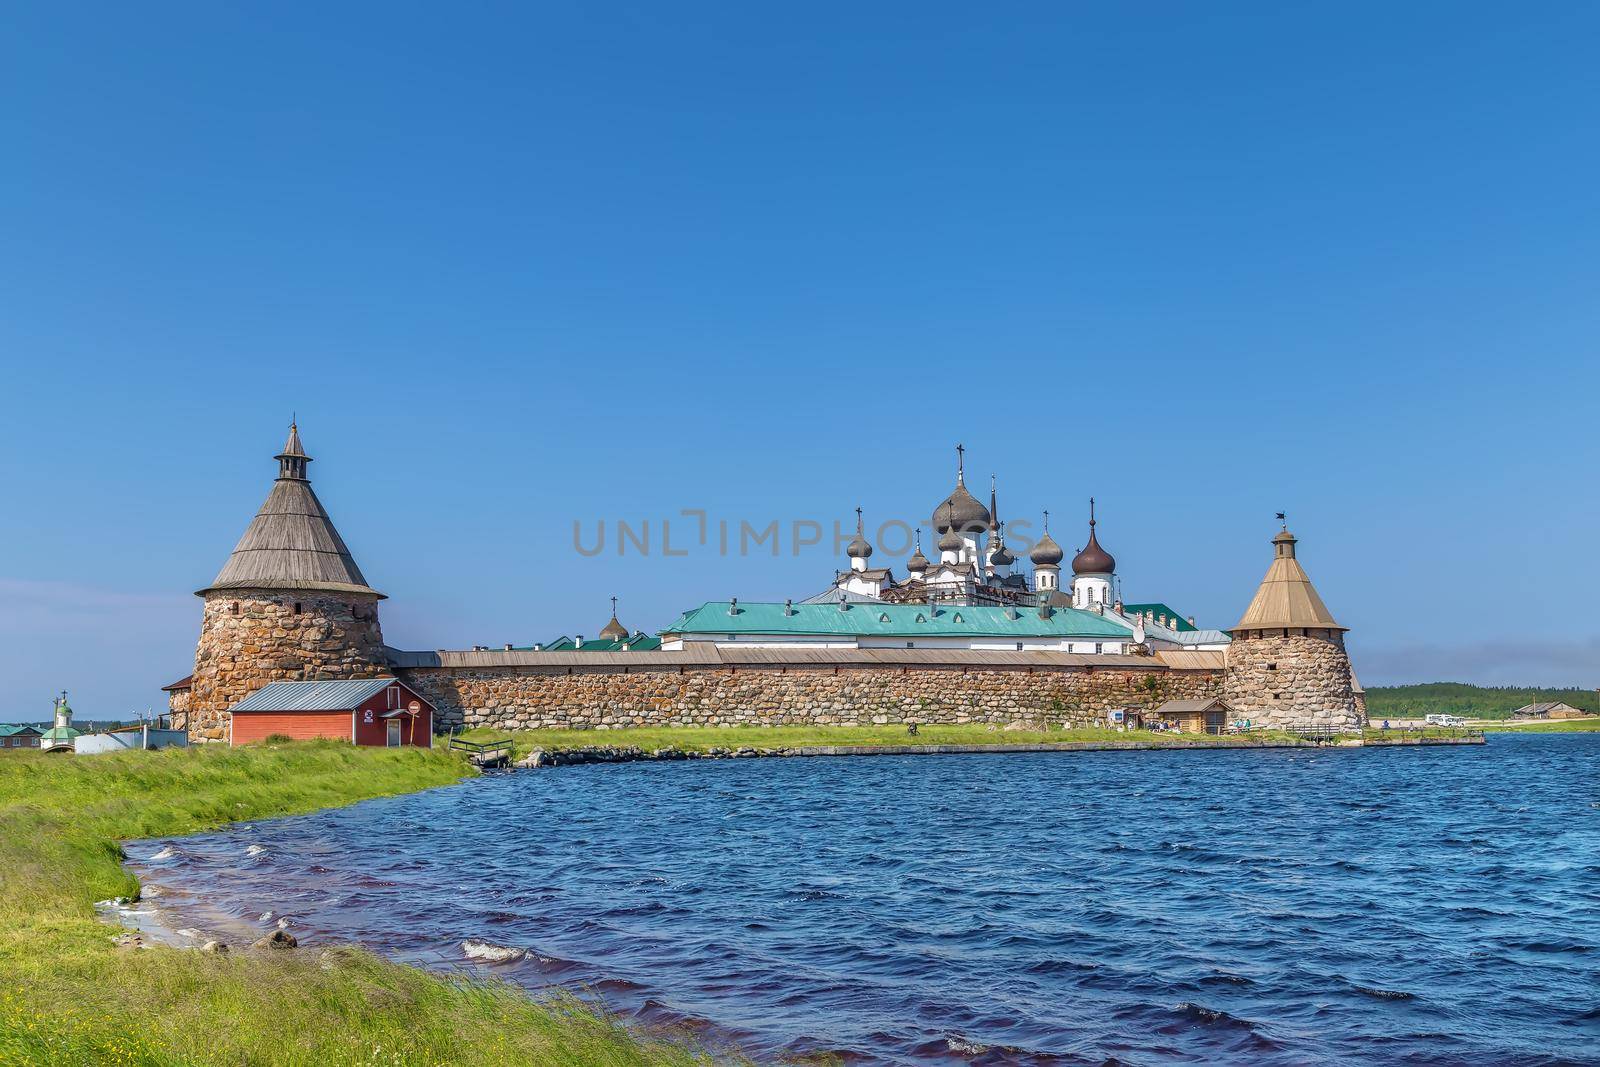 Solovetsky Monastery is a fortified monastery located on the Solovetsky Islands in the White Sea, Russia. Panoramic view from Holy lake